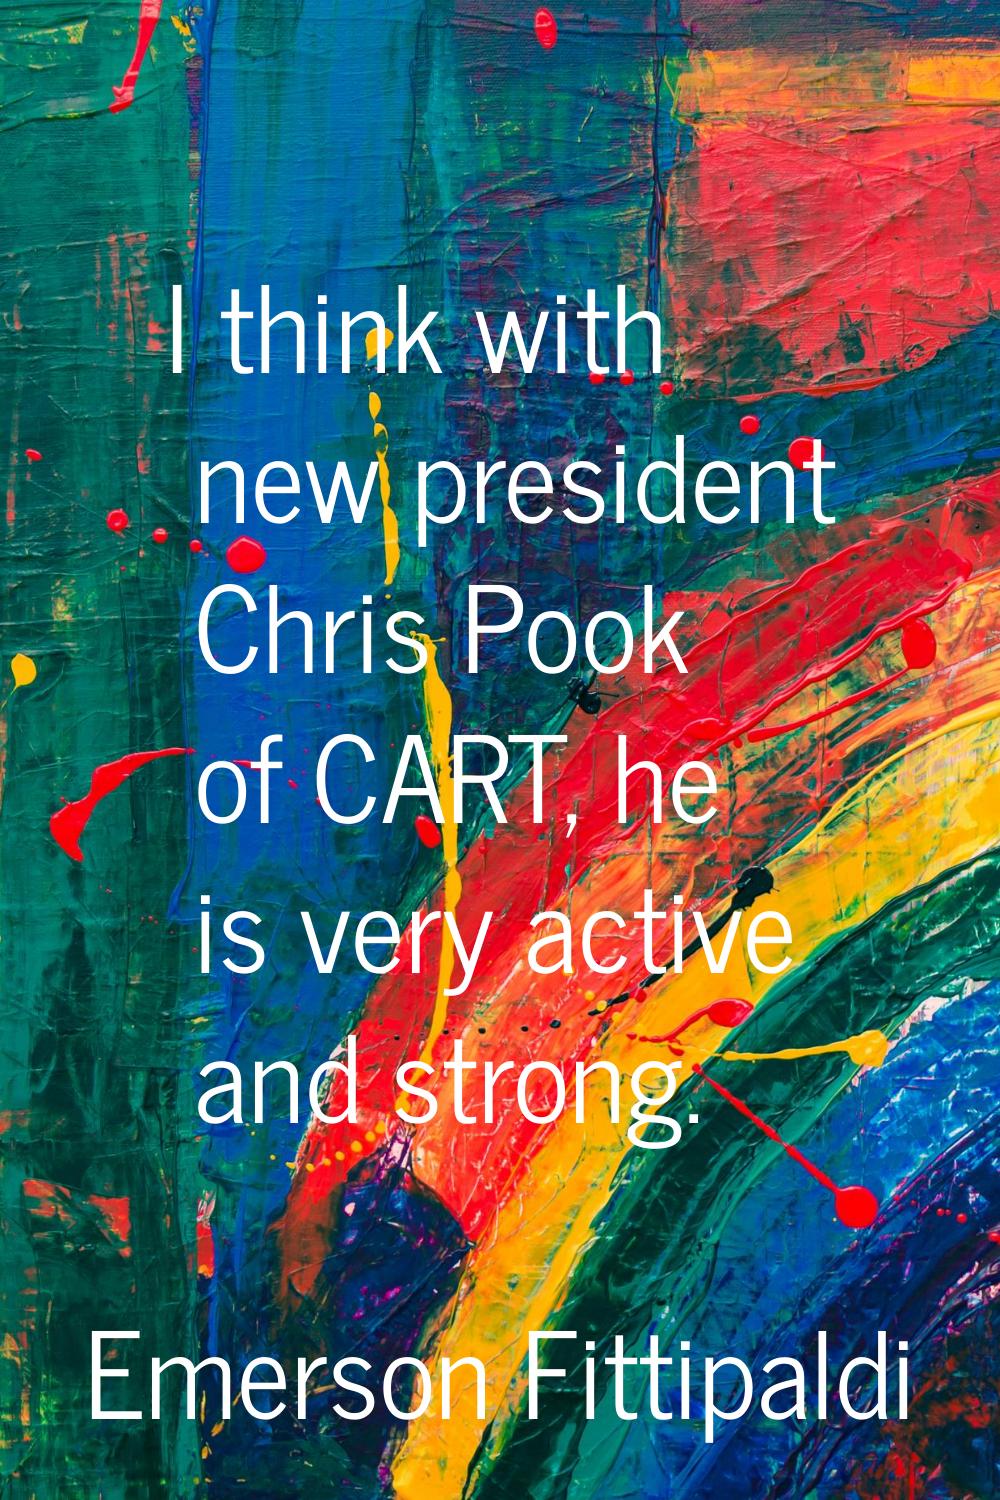 I think with new president Chris Pook of CART, he is very active and strong.